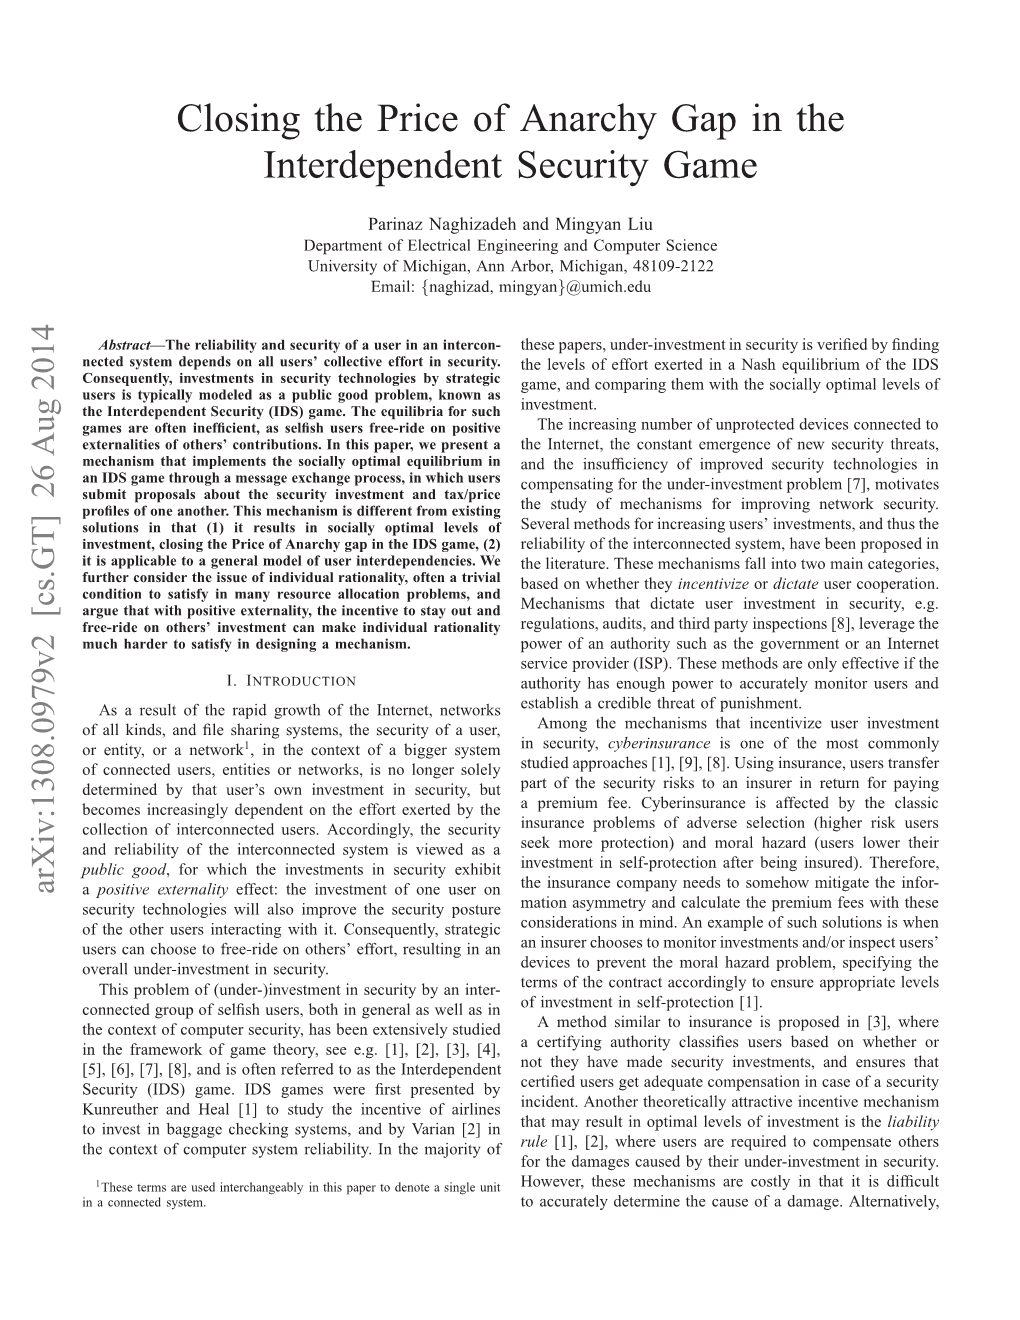 Closing the Price of Anarchy Gap in the Interdependent Security Game